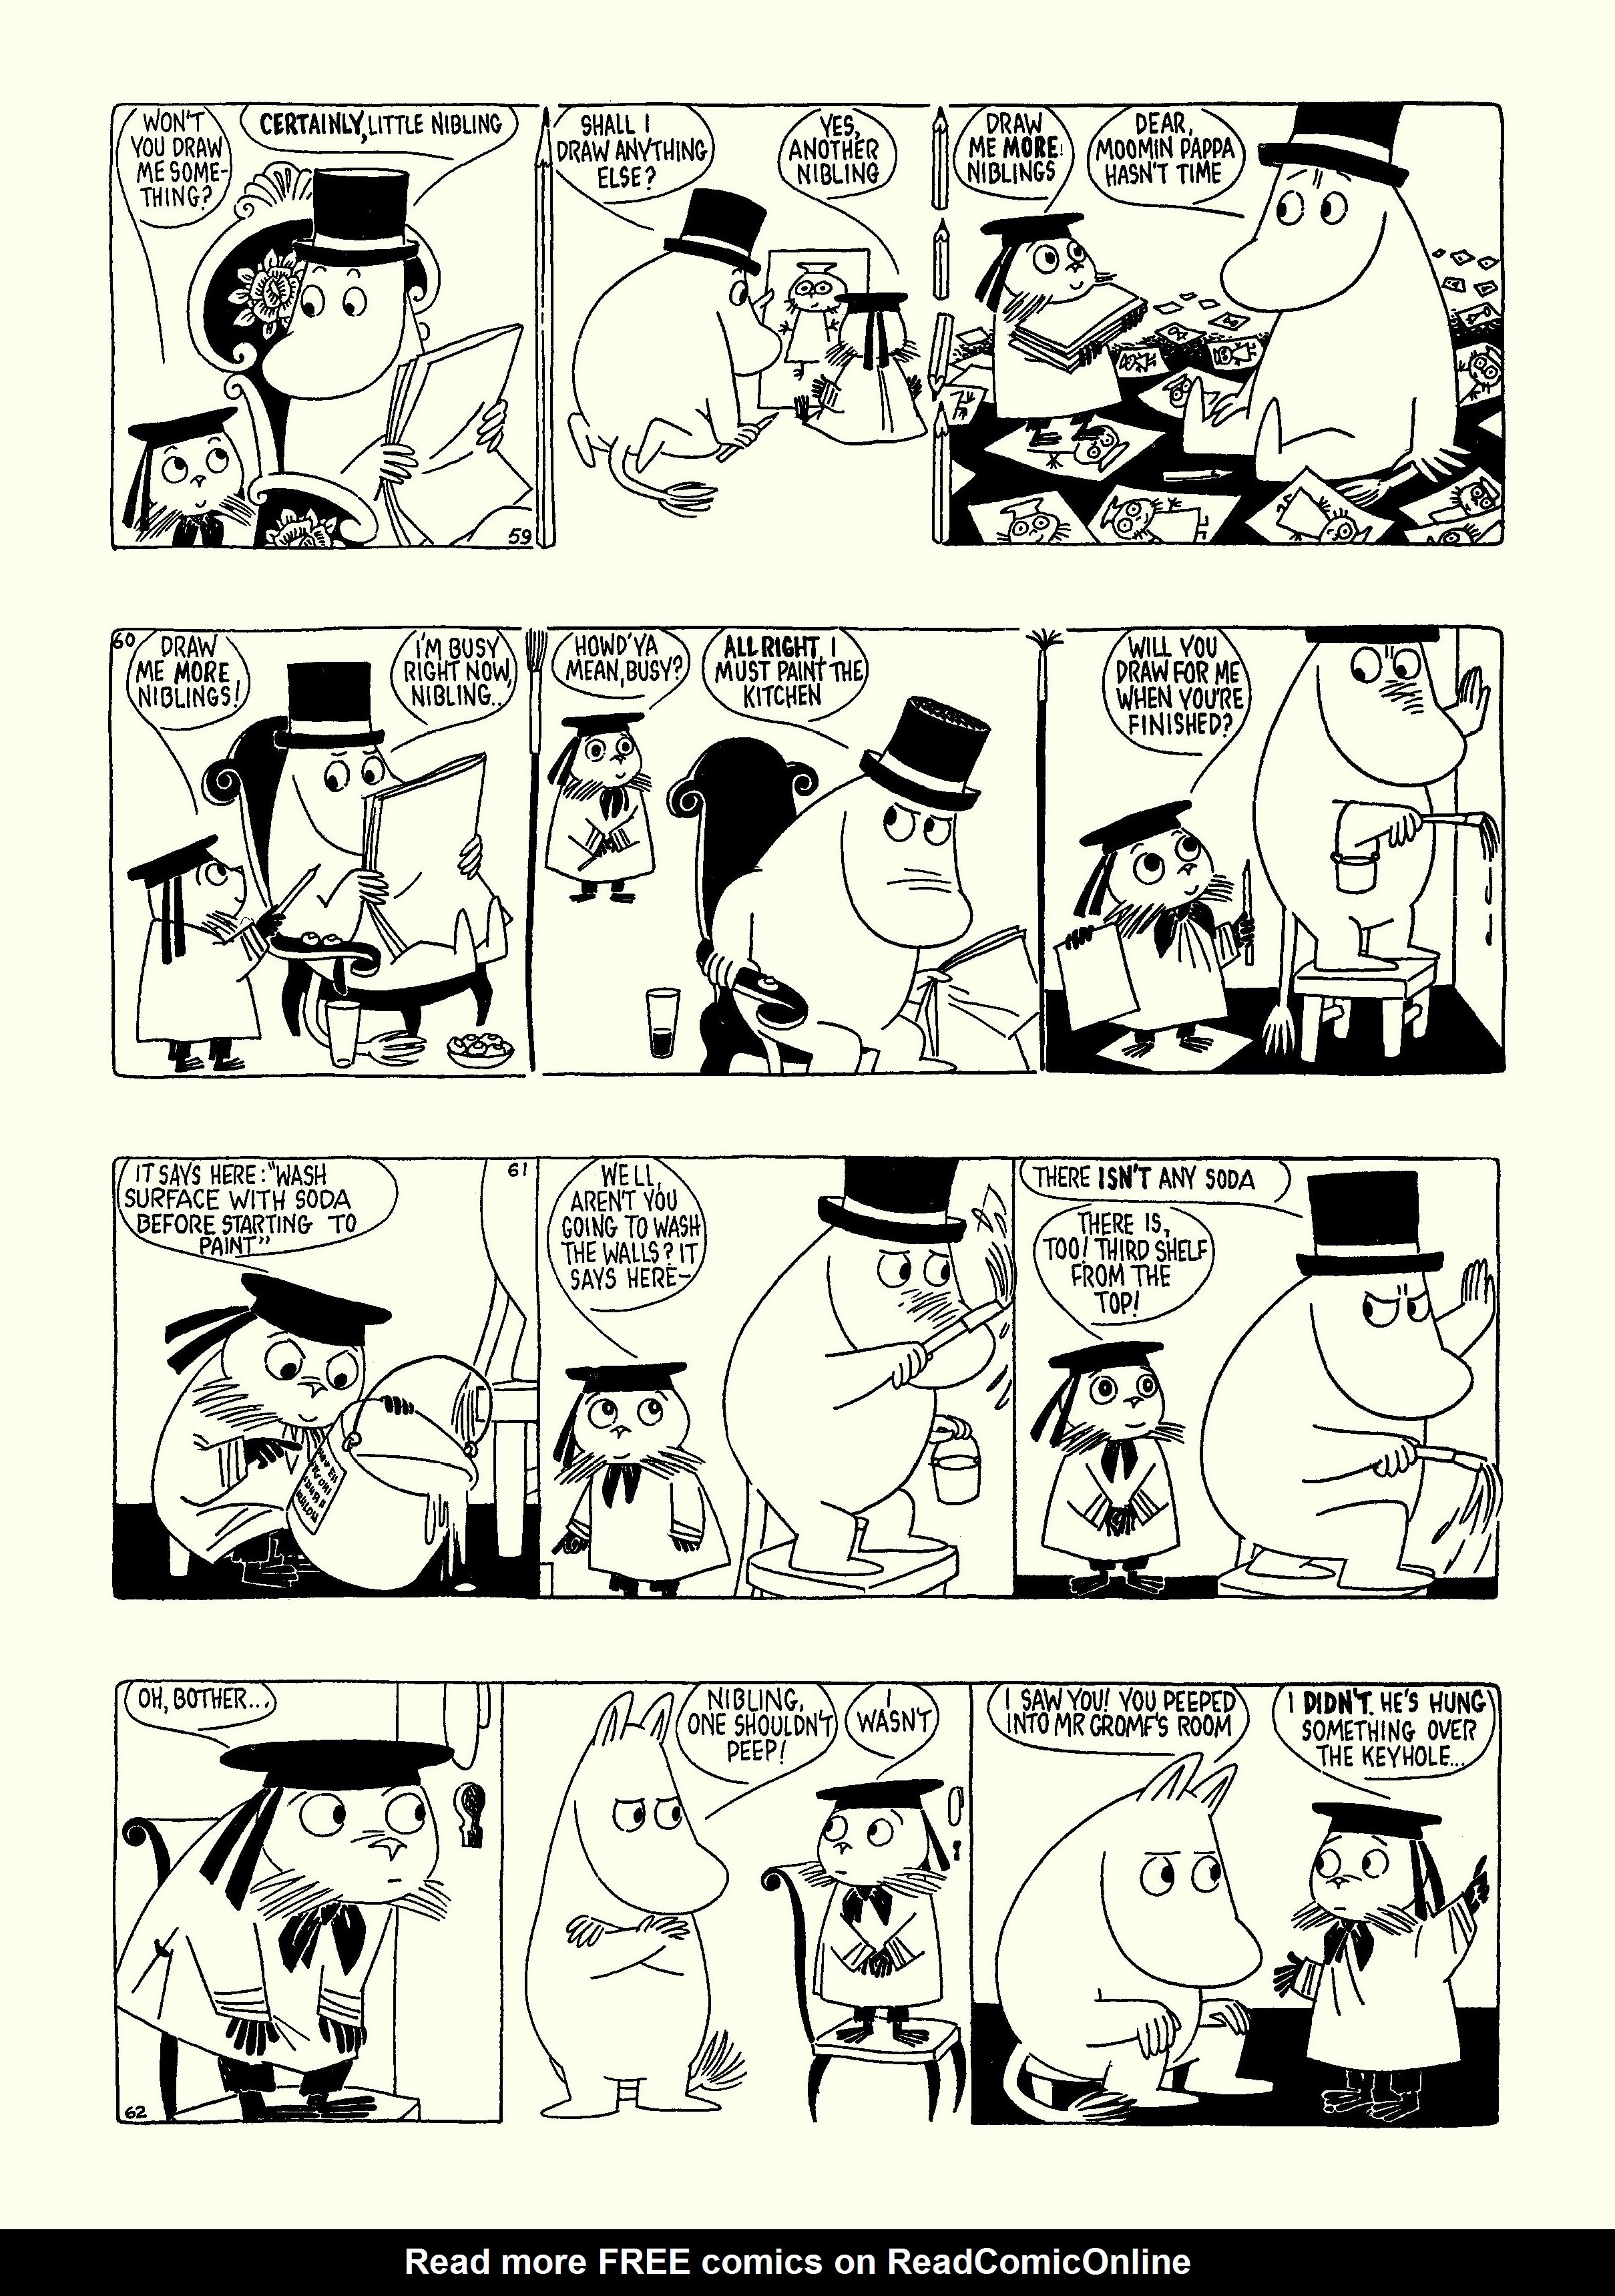 Read online Moomin: The Complete Tove Jansson Comic Strip comic -  Issue # TPB 5 - 21